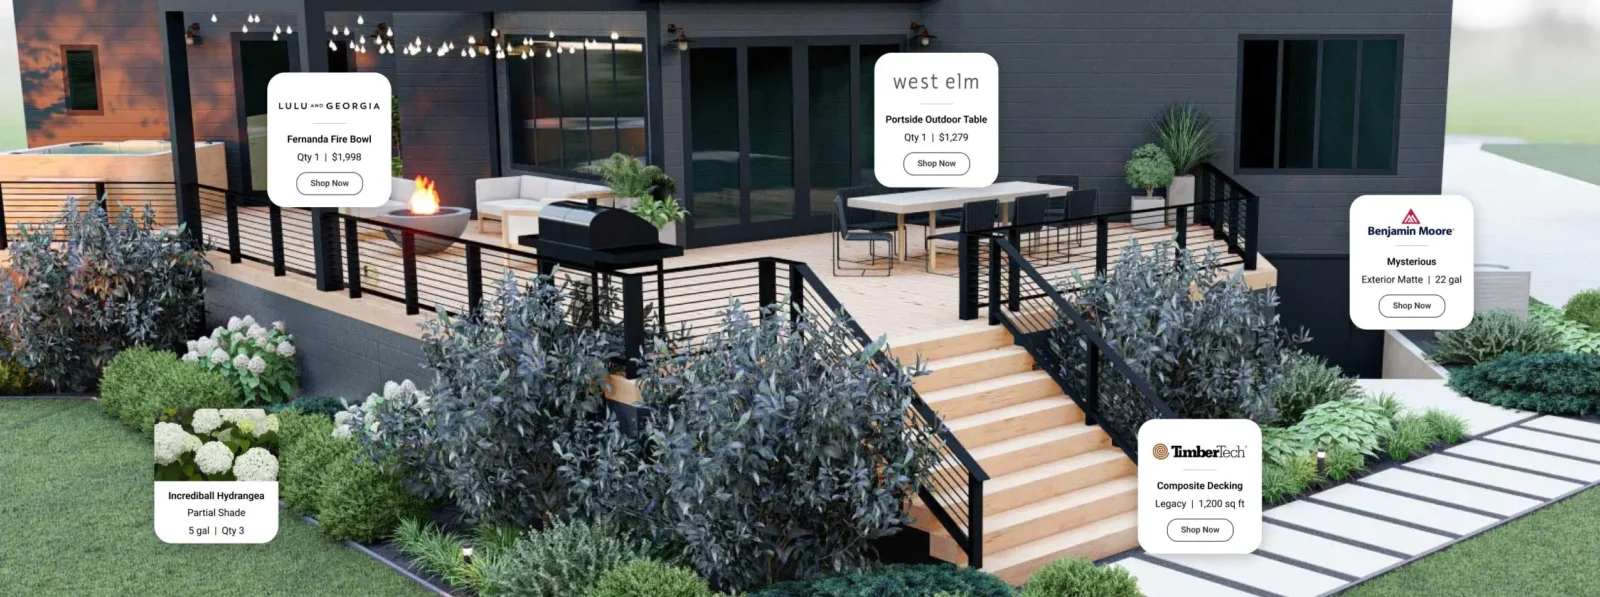 Yardzen render of a back yard with product names, brand and shopping button overlaid on it